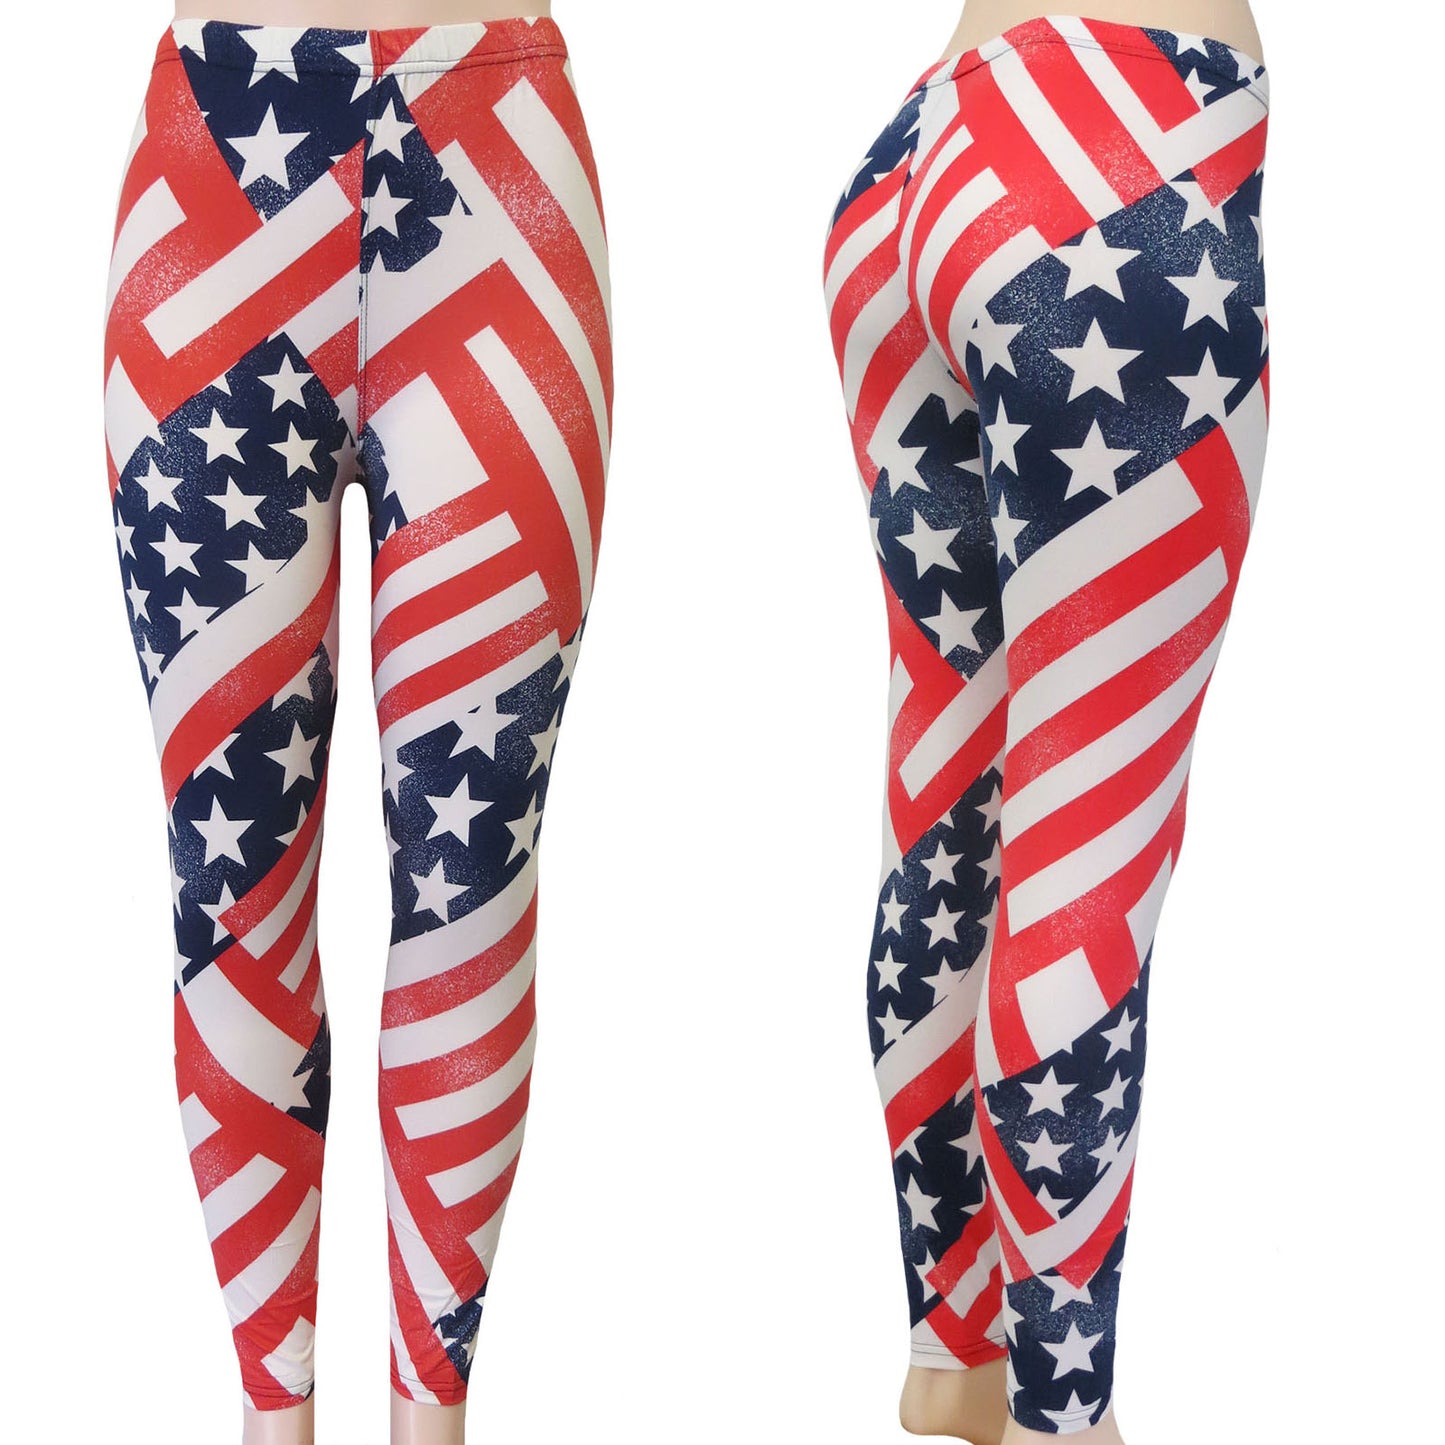 Wholesale USA Flag Leggings in Faded Red White and Blue Stars and Stripes